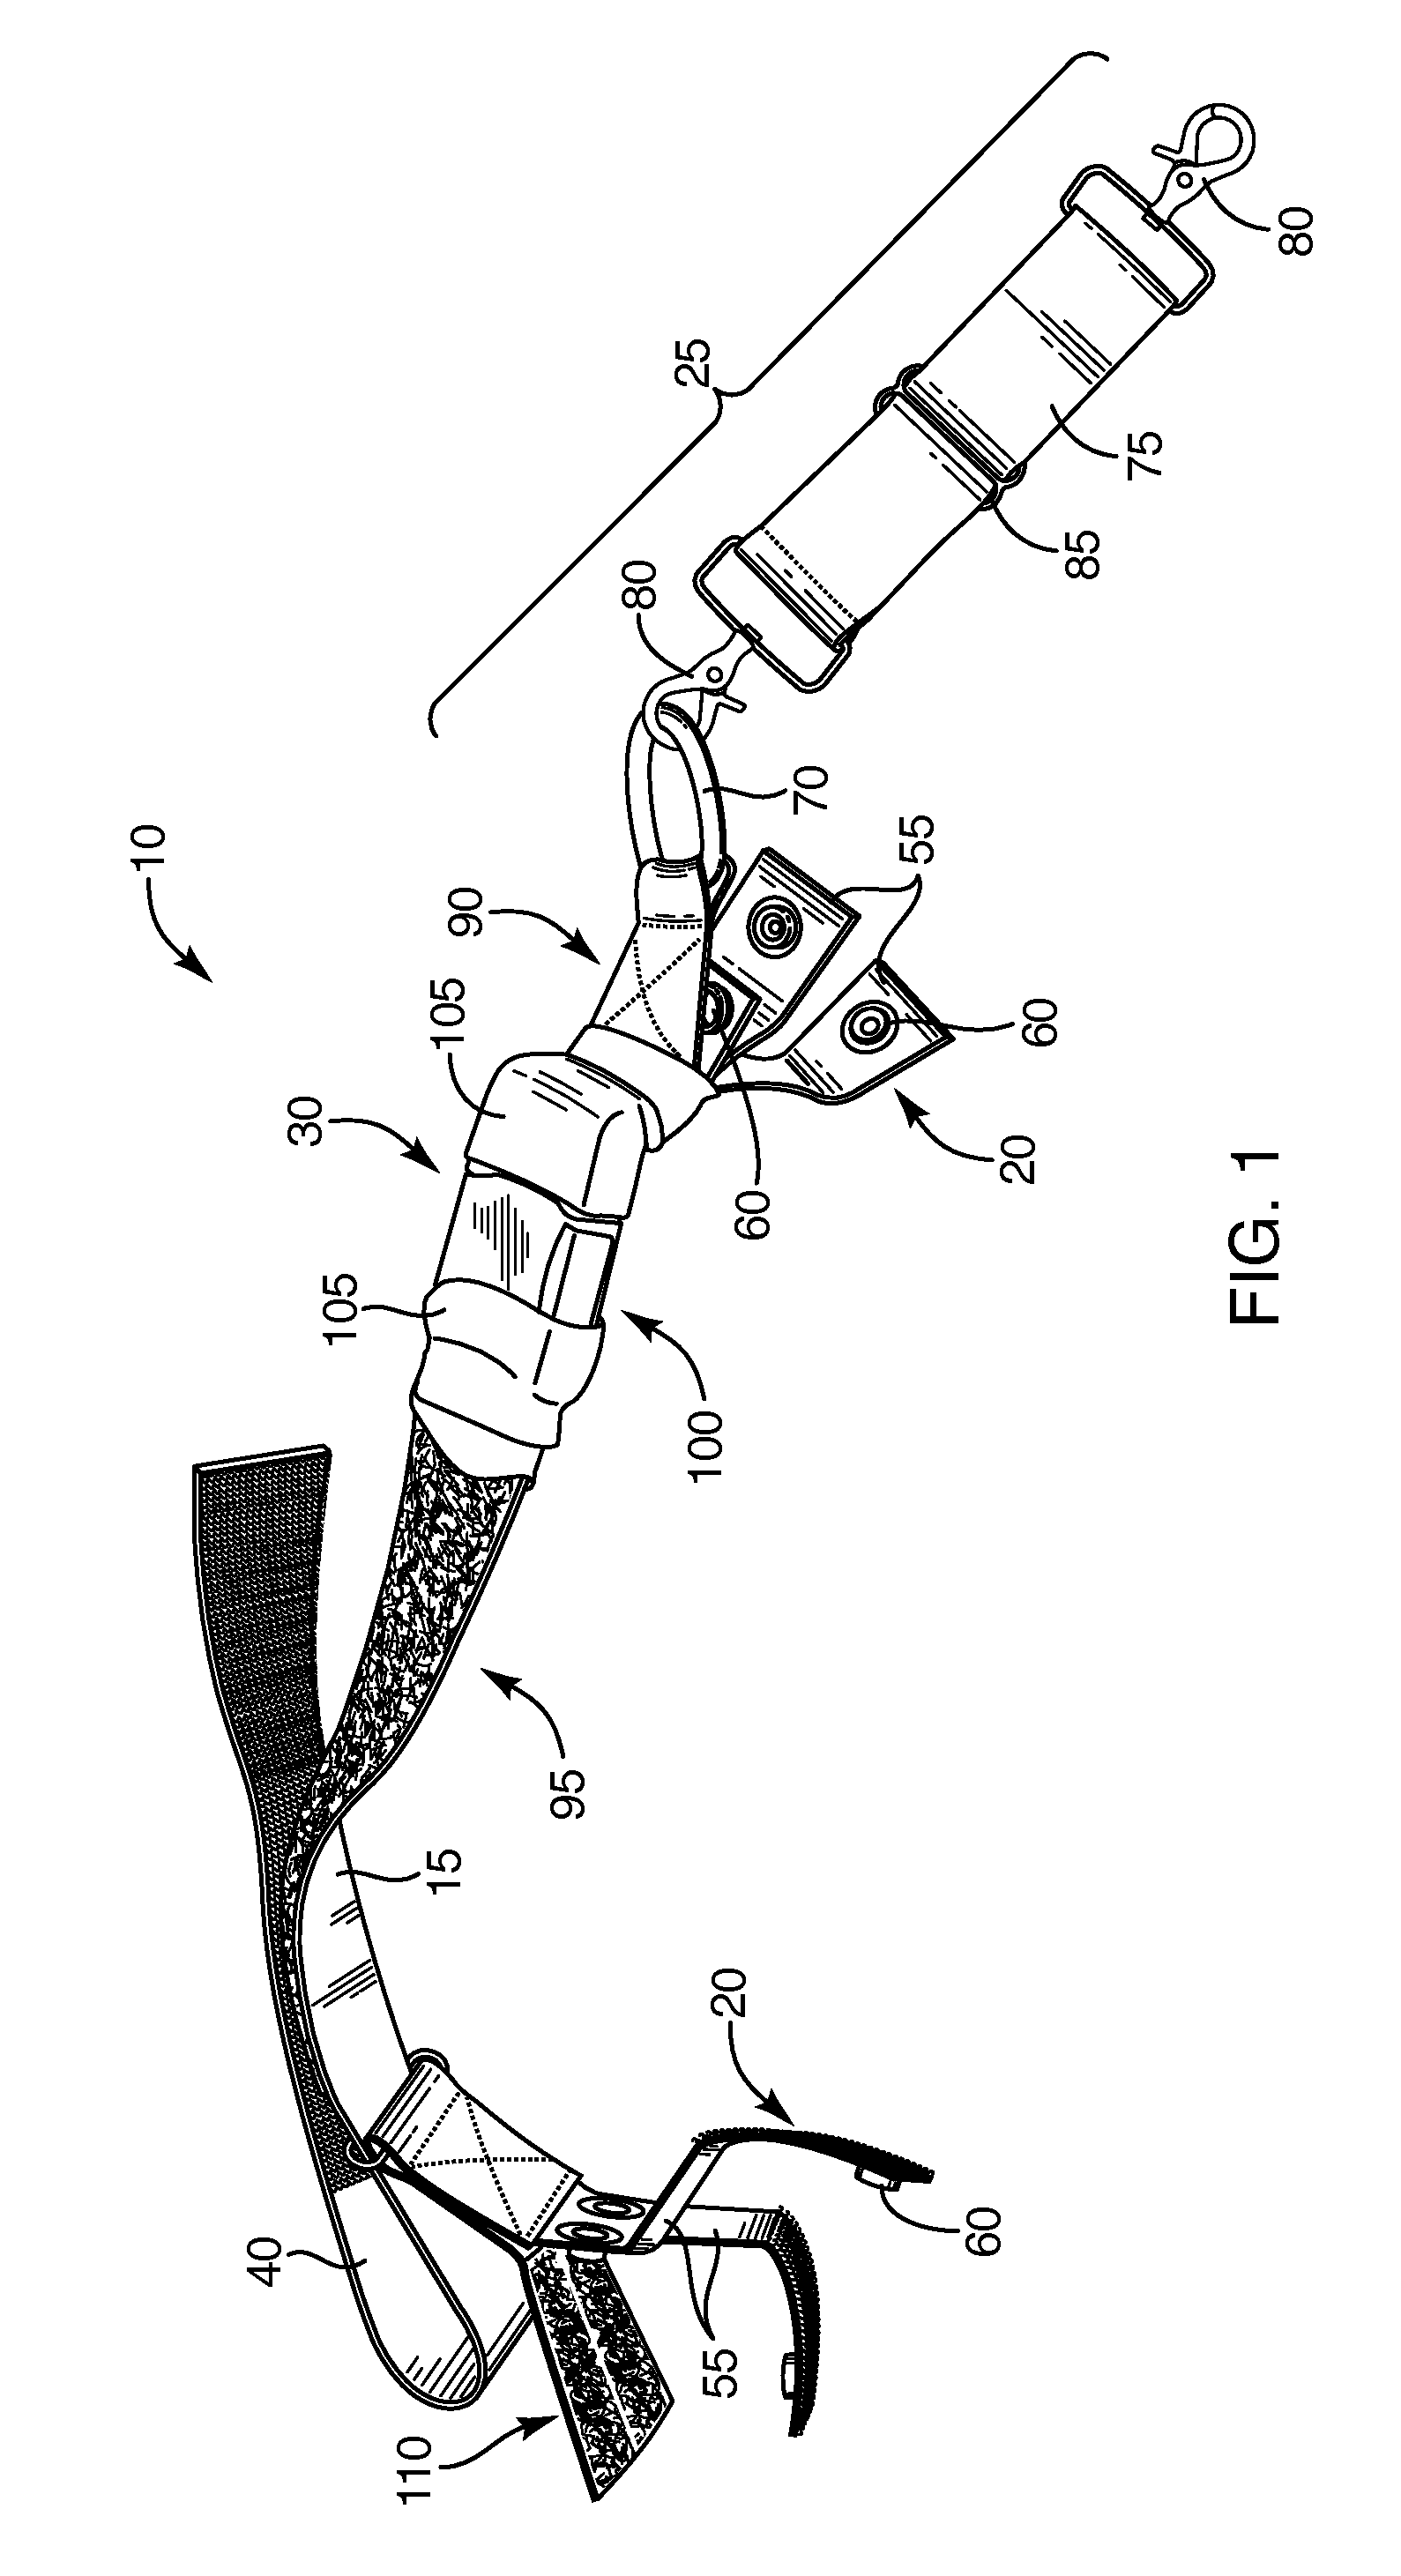 Systems and methods for carrying a weapon